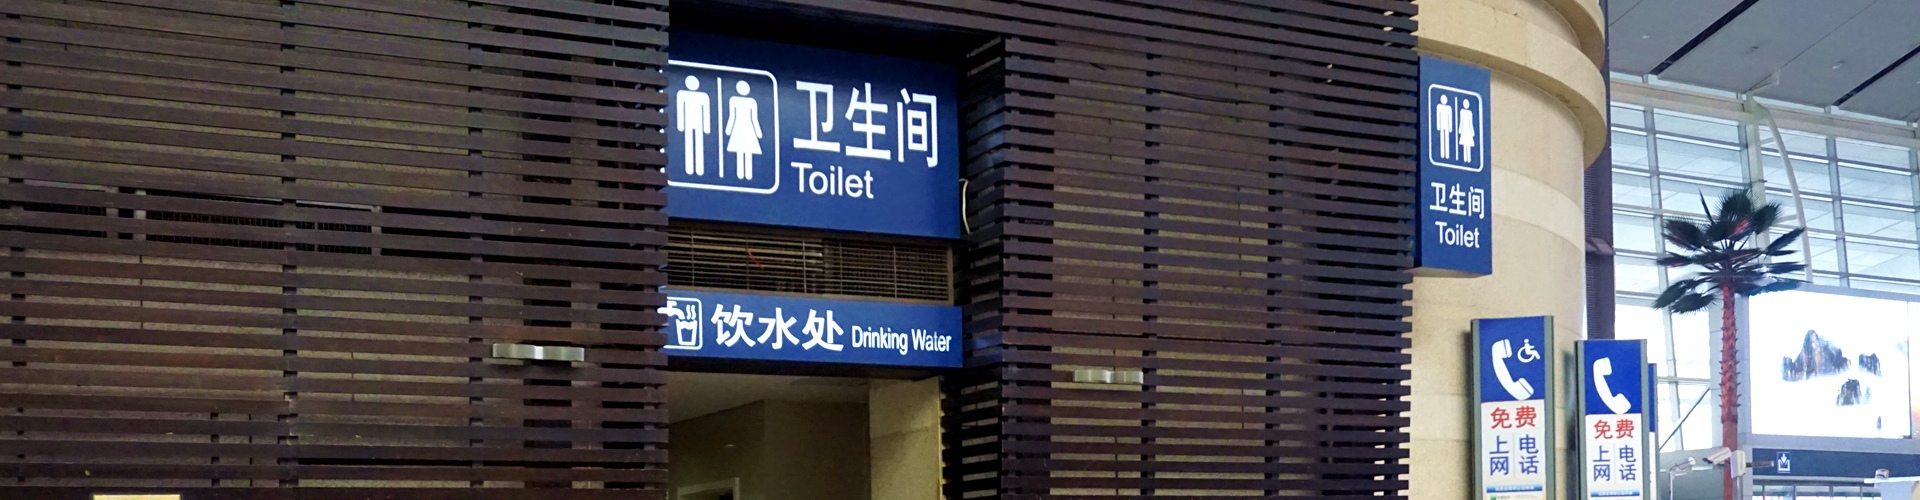 China's Snazzy Toilet Rituals